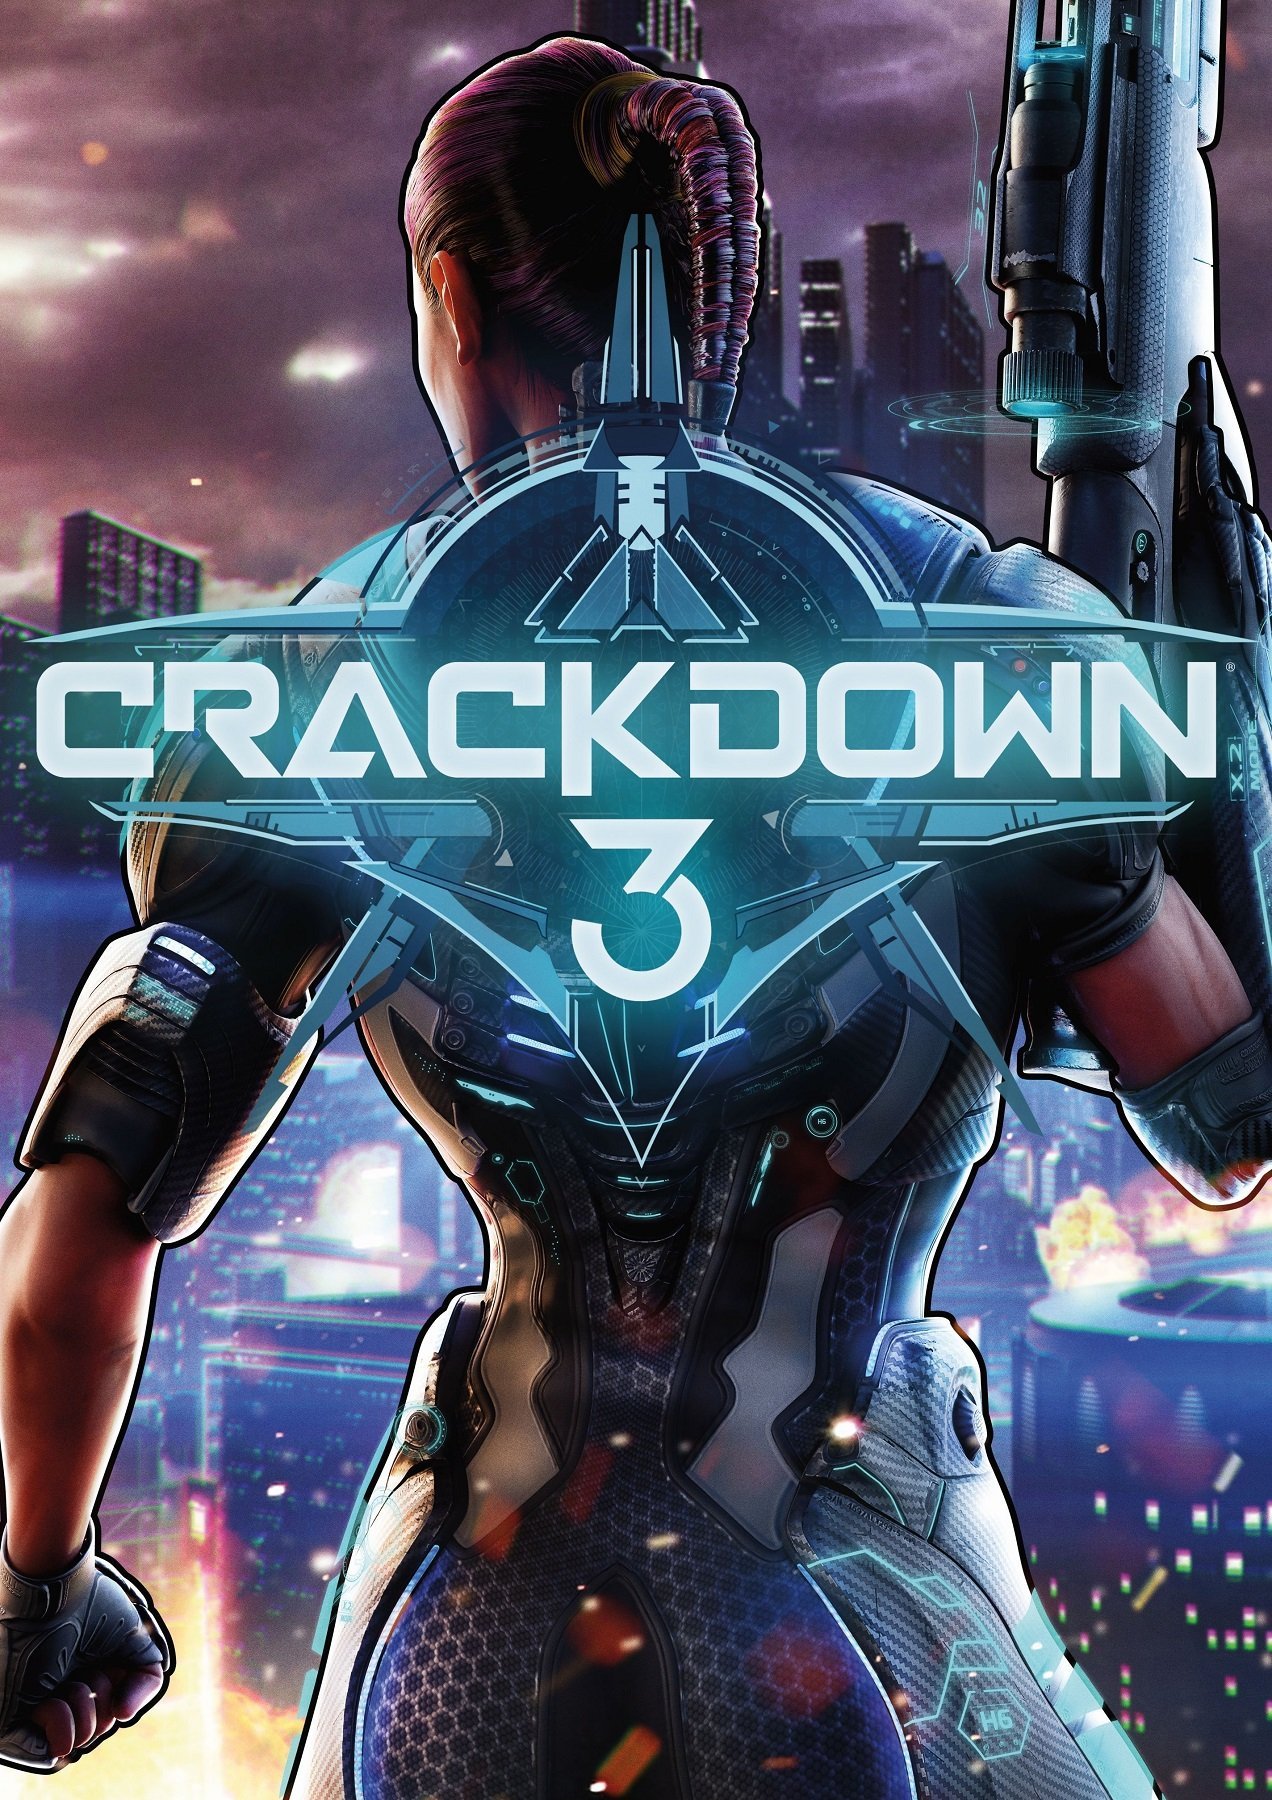 Image of Crackdown 3